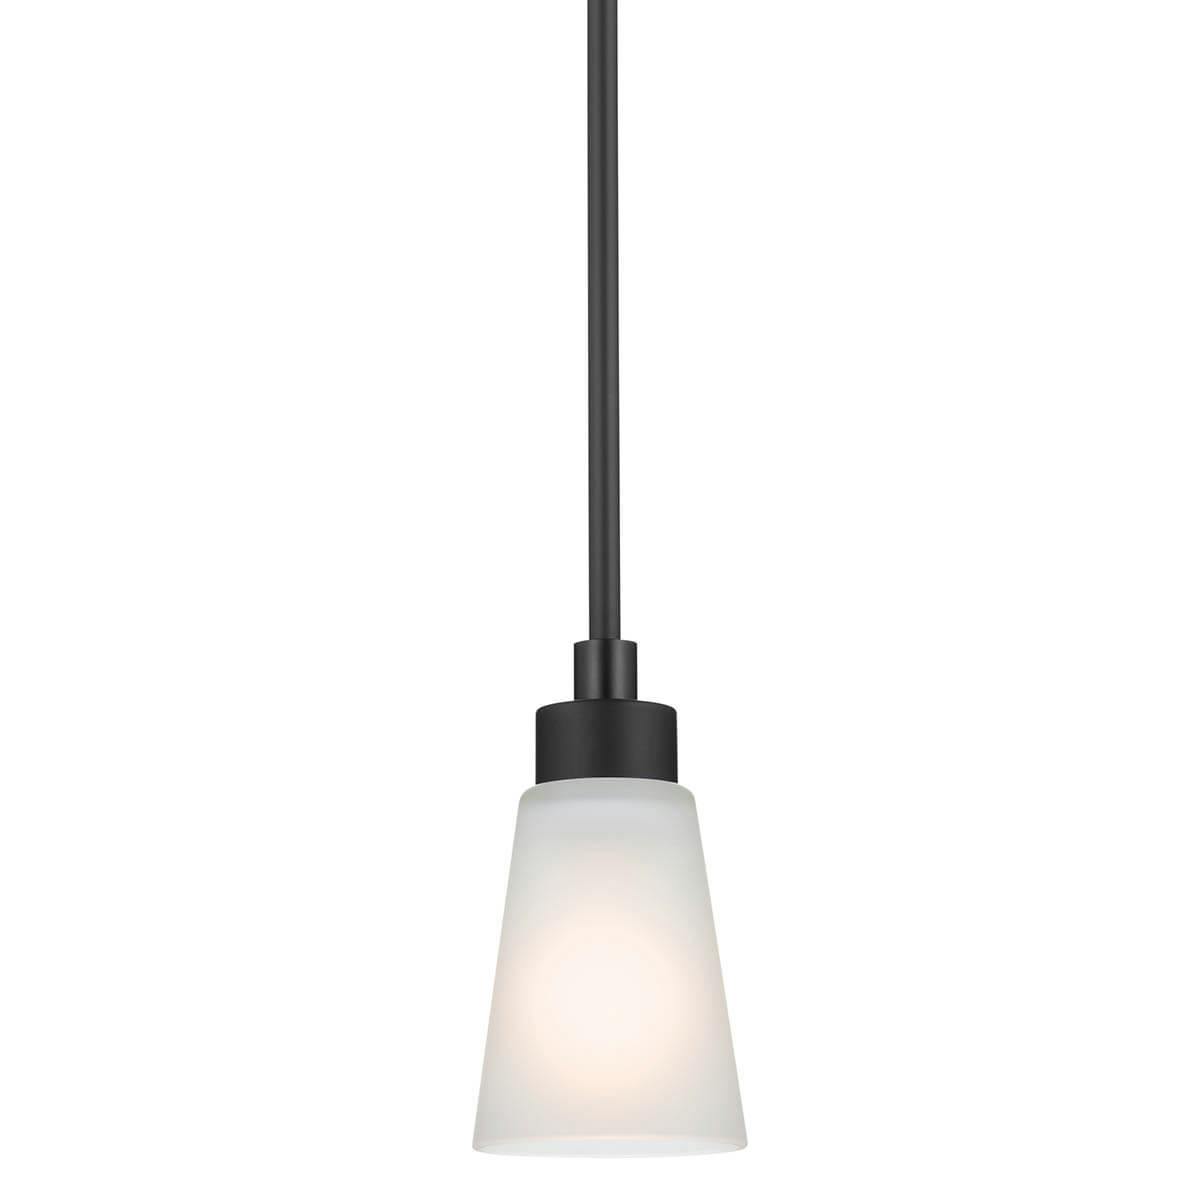 Erma 4.25" 1 Light Mini Pendant Black without the canopy on a white background